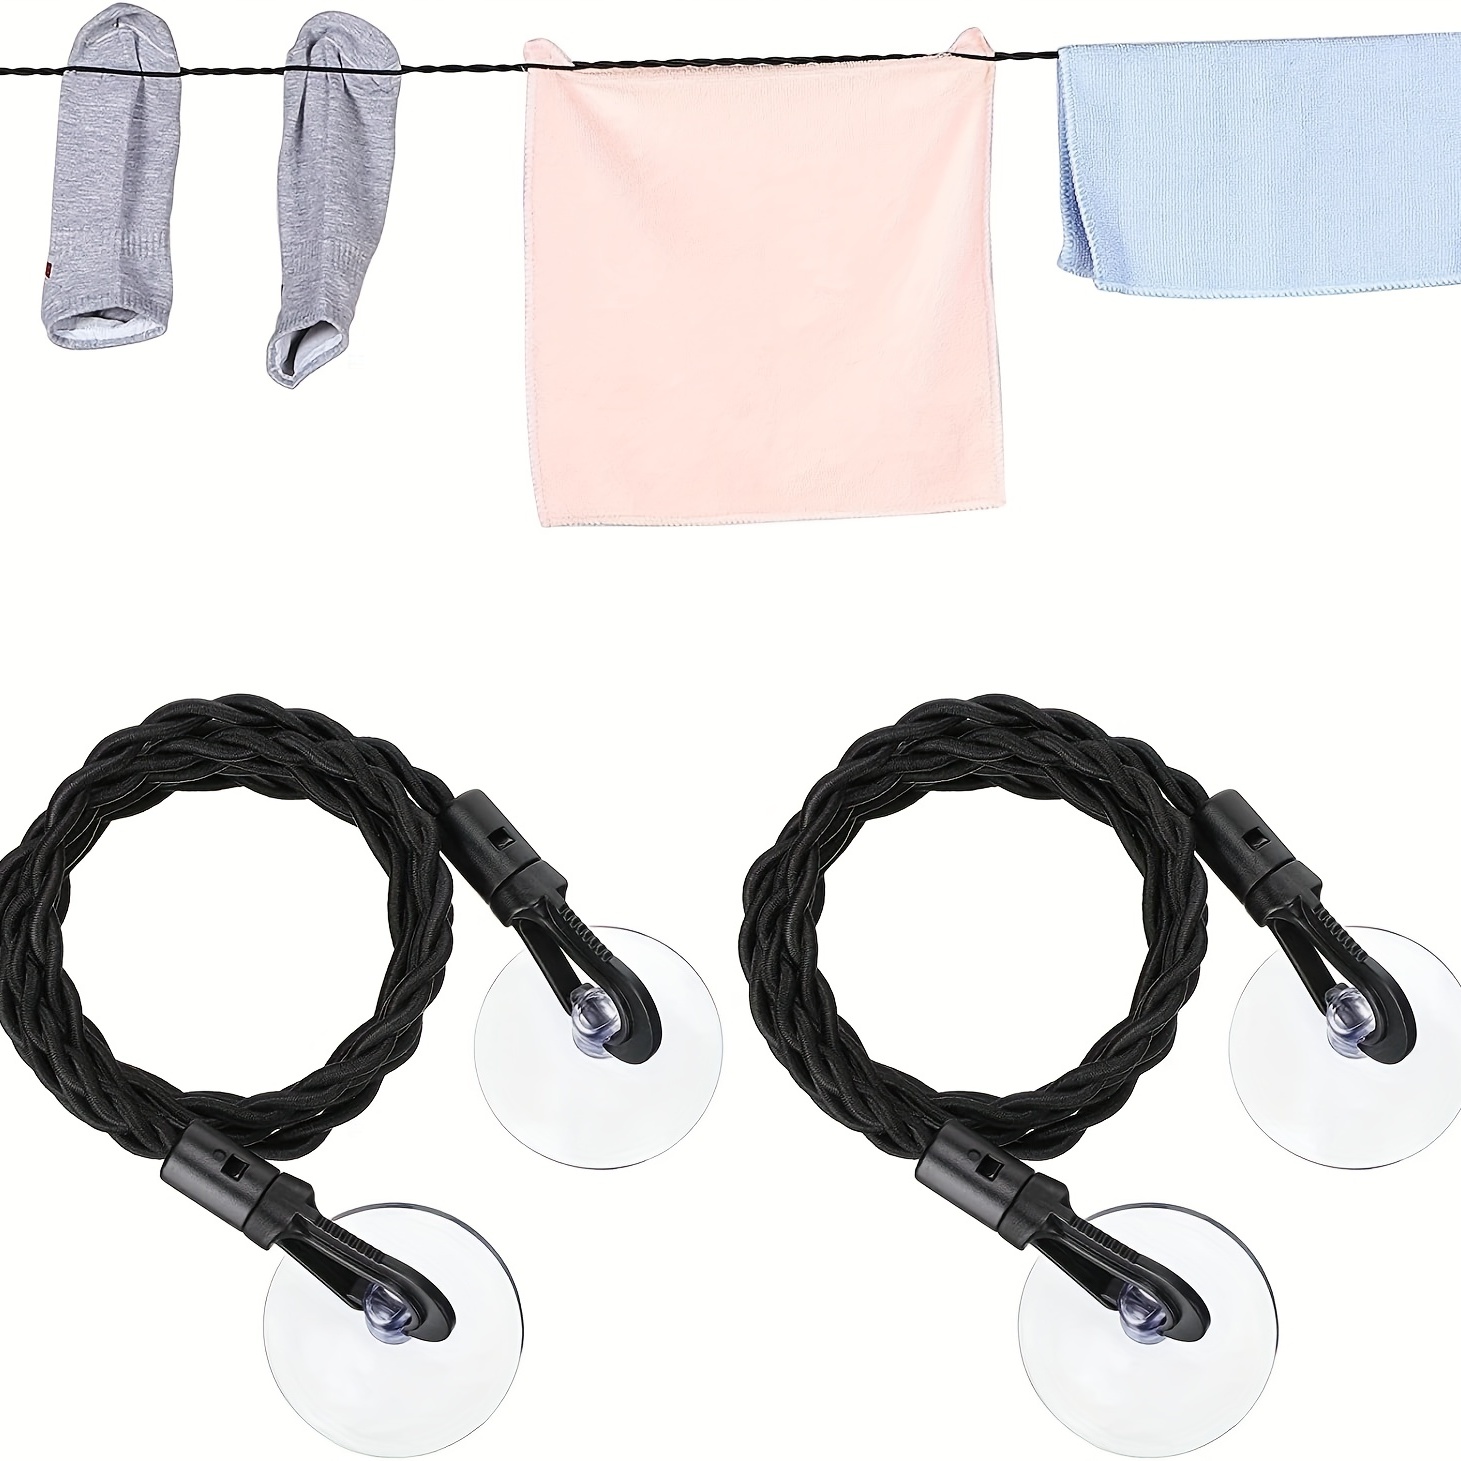  Retractable Portable Clothesline for Travel，Clothing line with  12 Clothes Clips, for Indoor Laundry Drying line,Outdoor Camping  Accessories : Home & Kitchen